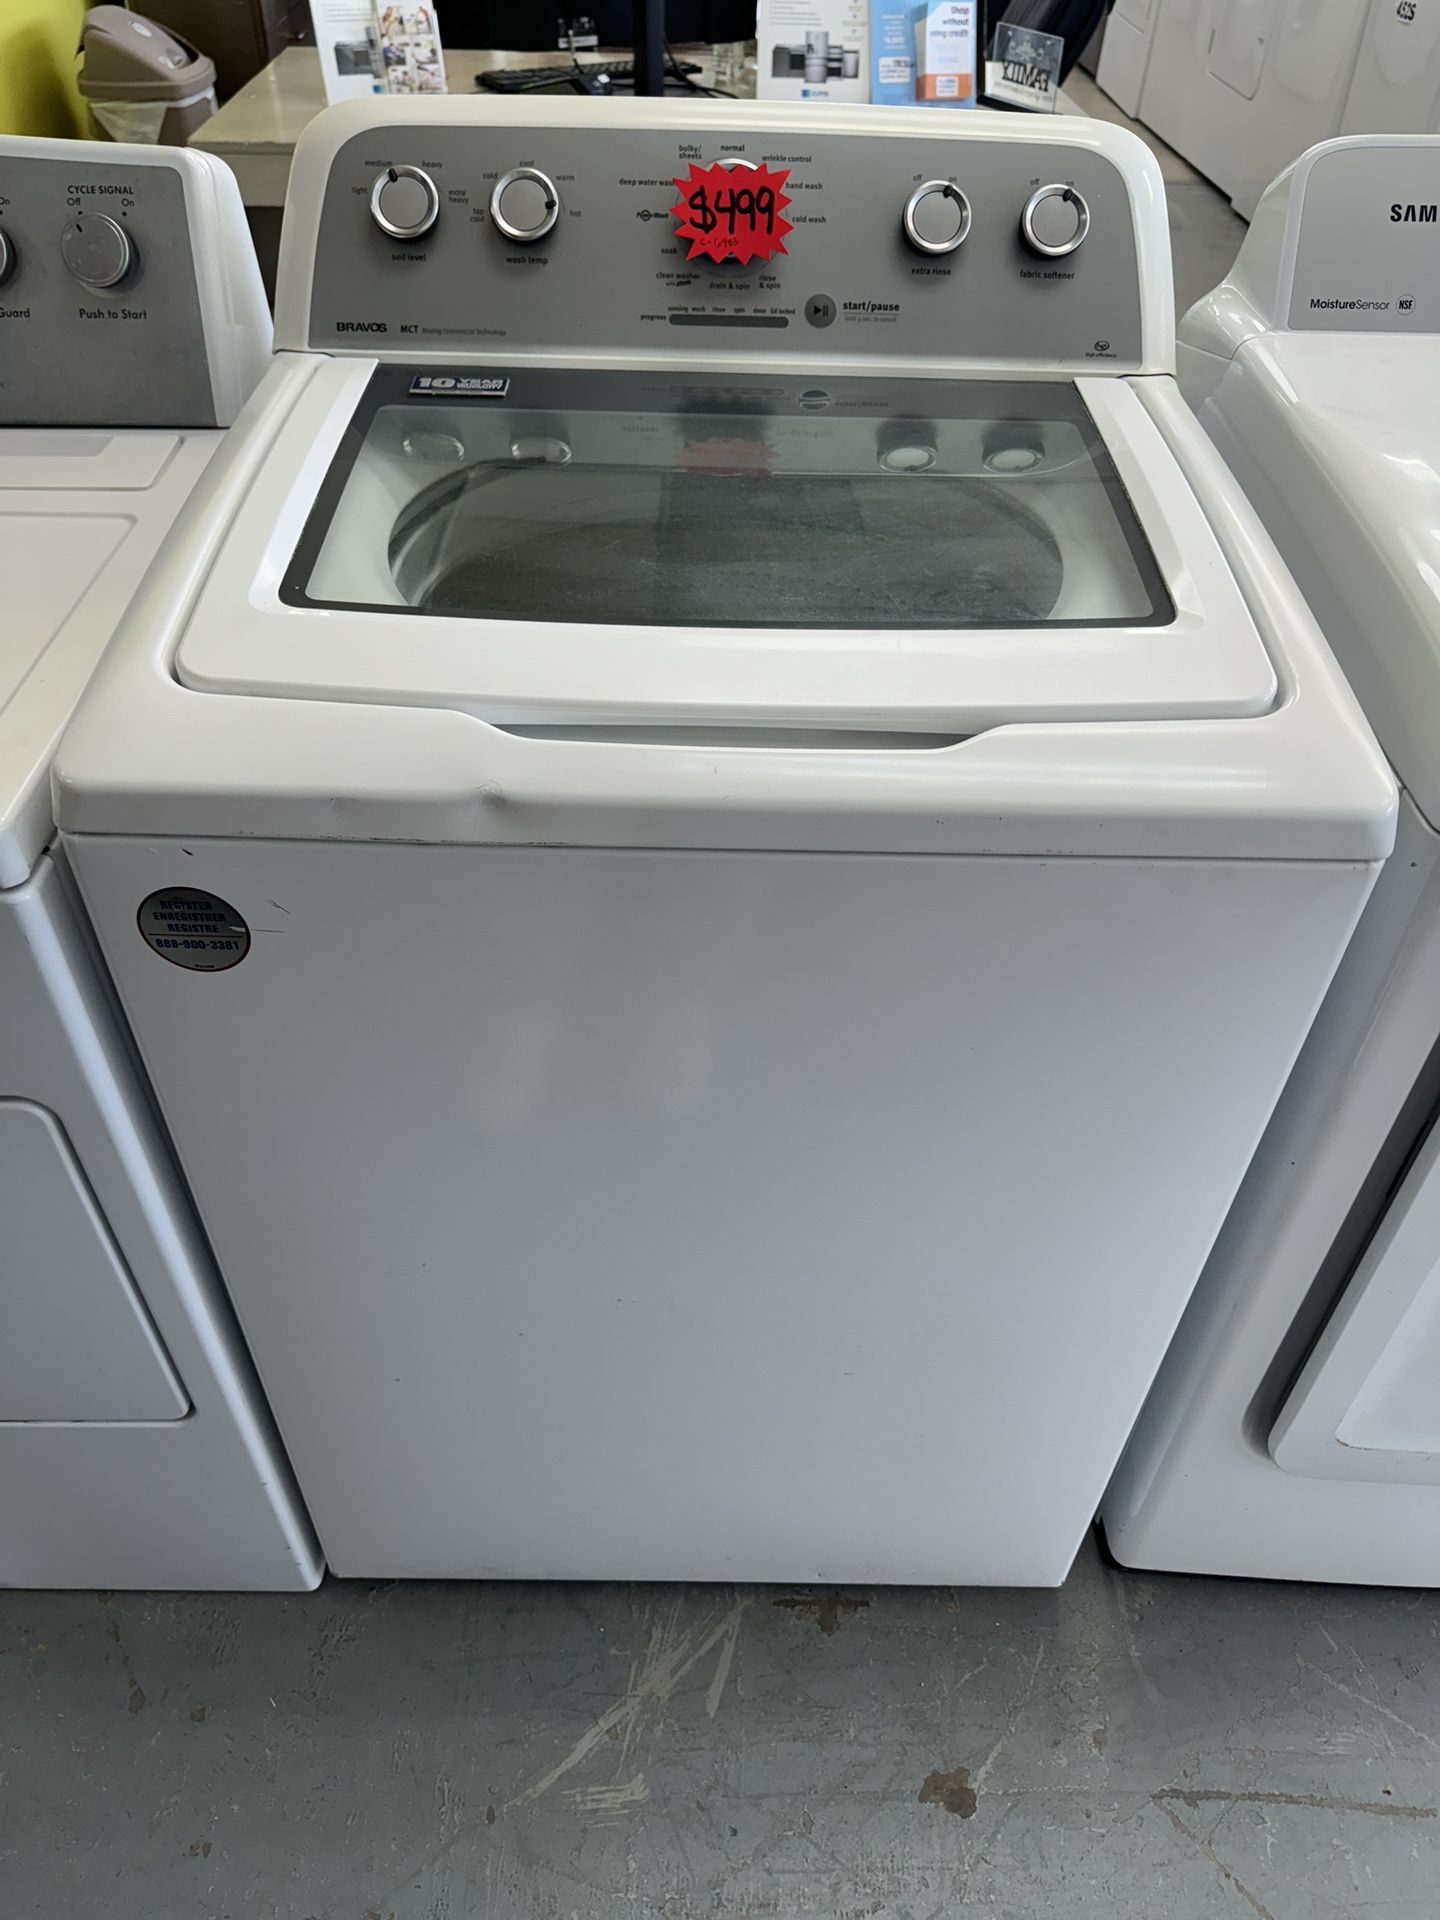 Maytag Top Load Washer 